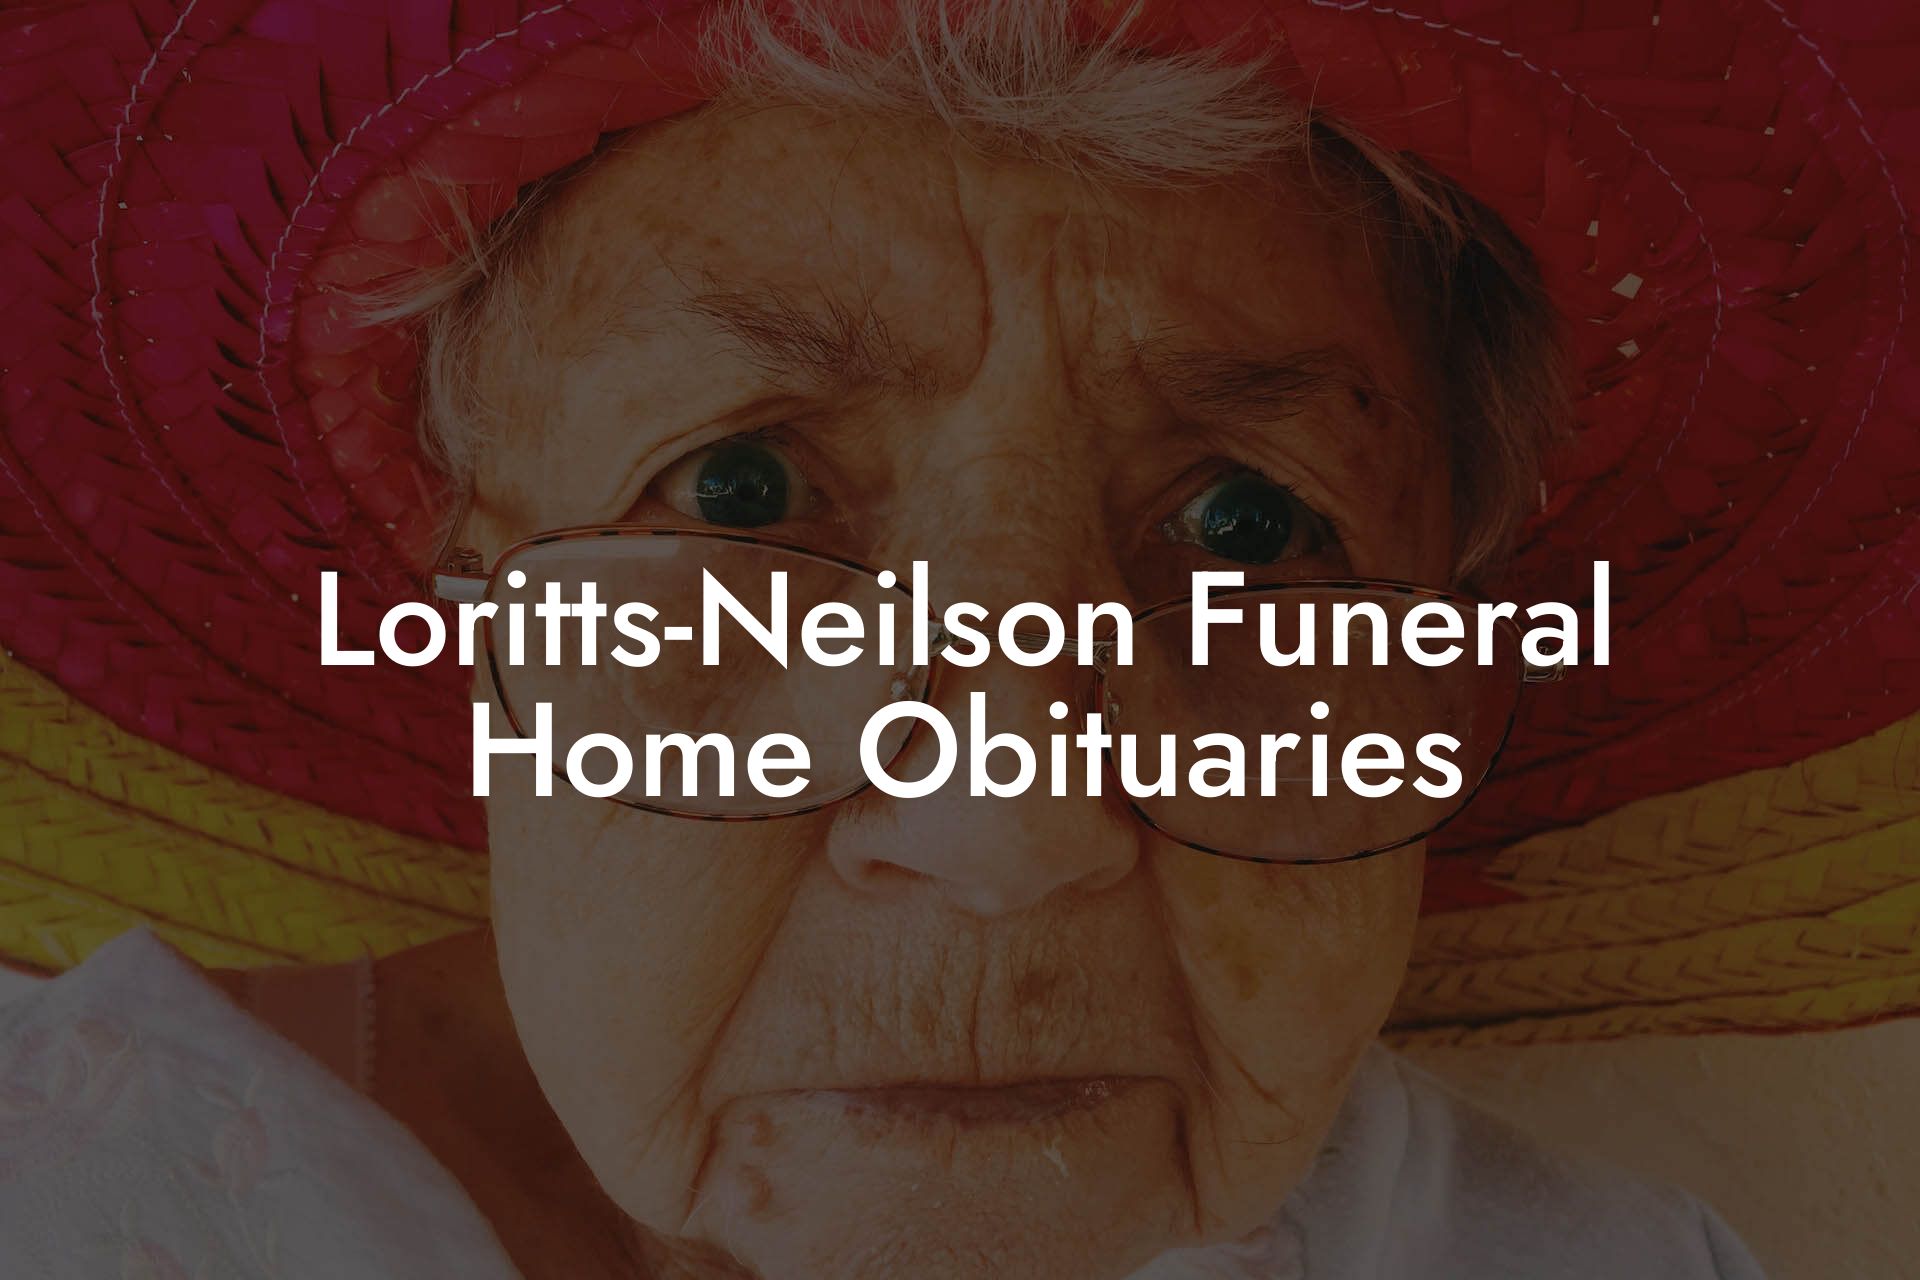 Loritts-Neilson Funeral Home Obituaries